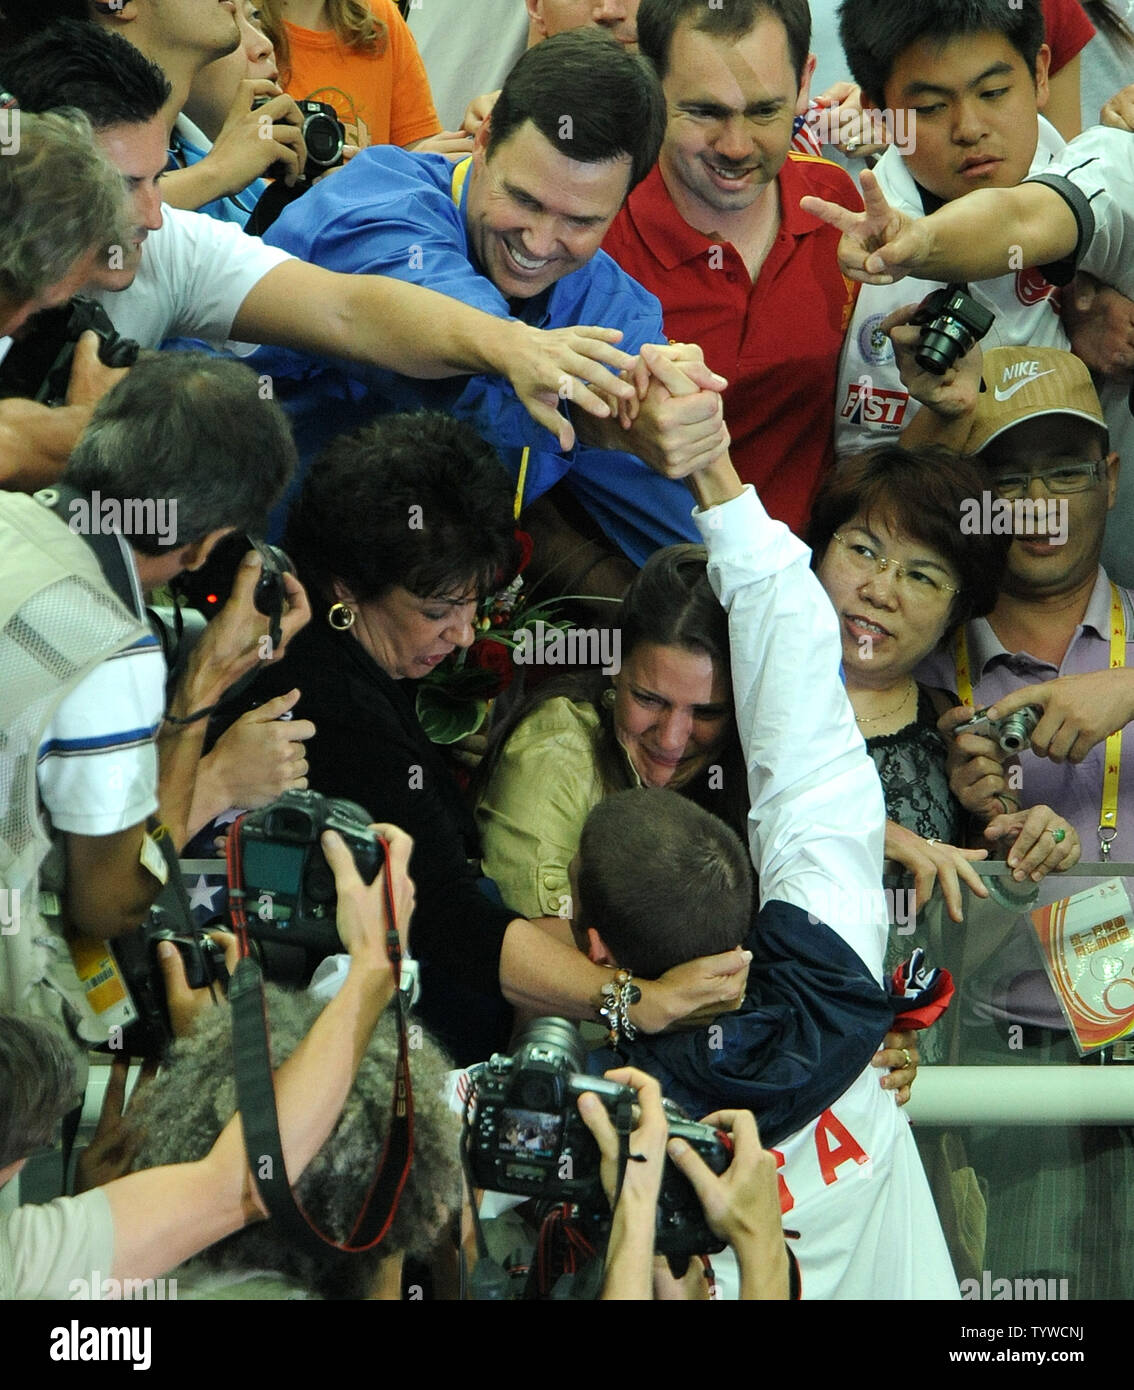 USA's Michael Phelps is congratulated by his mother, sister and others in the stands after the US team received their medals for the Men's 4x100M Medley, setting a world record of 3:29.34, at the National Aquatic Center (Water Cube) during the 2008 Summer Olympics in Beijing, China, on August 17, 2008.  Phelps set the world record for medals in a single Olympics with 8, passing Mark Spitz.    (UPI Photo/Roger L. Wollenberg) Stock Photo